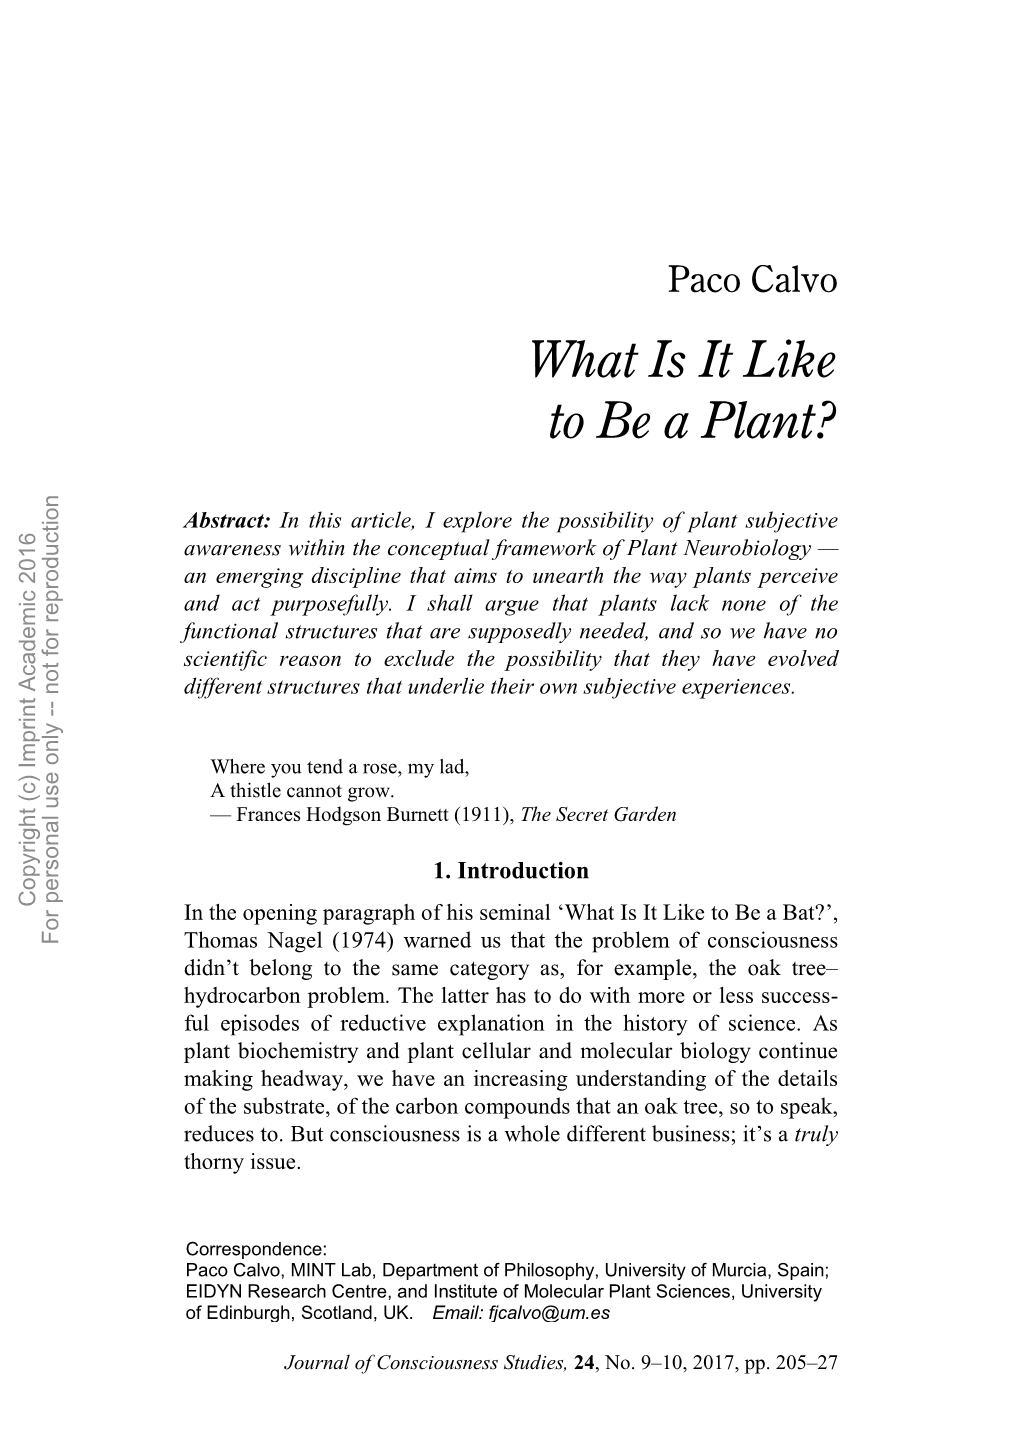 What Is It Like to Be a Plant?